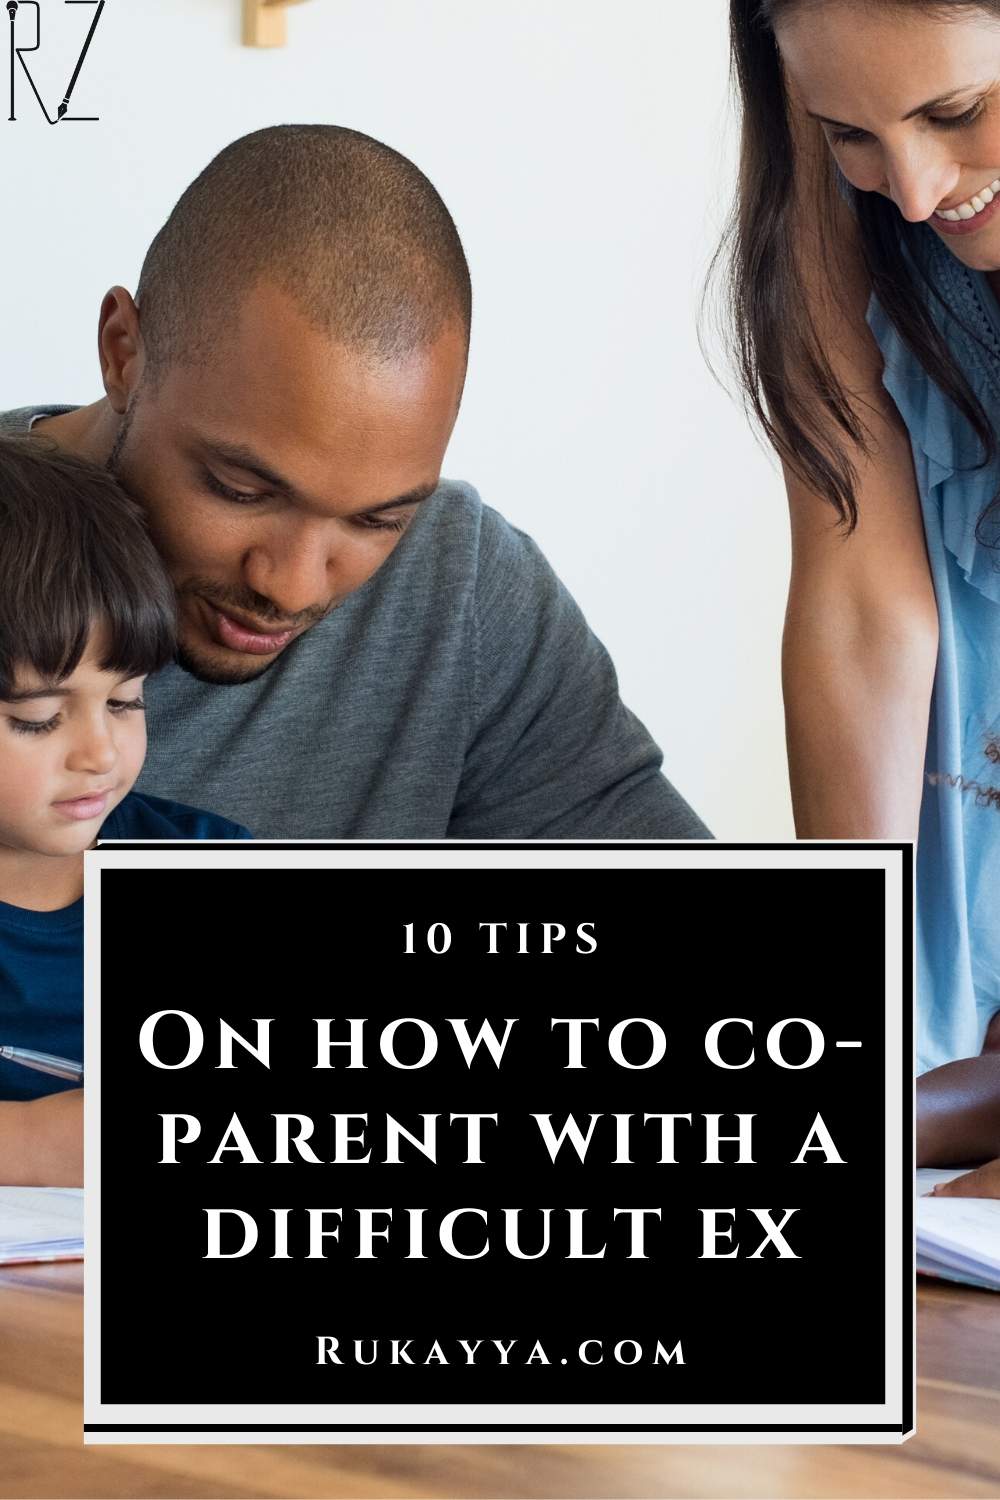 How To Co-parent With A Difficult Ex? 10 Quick Tips